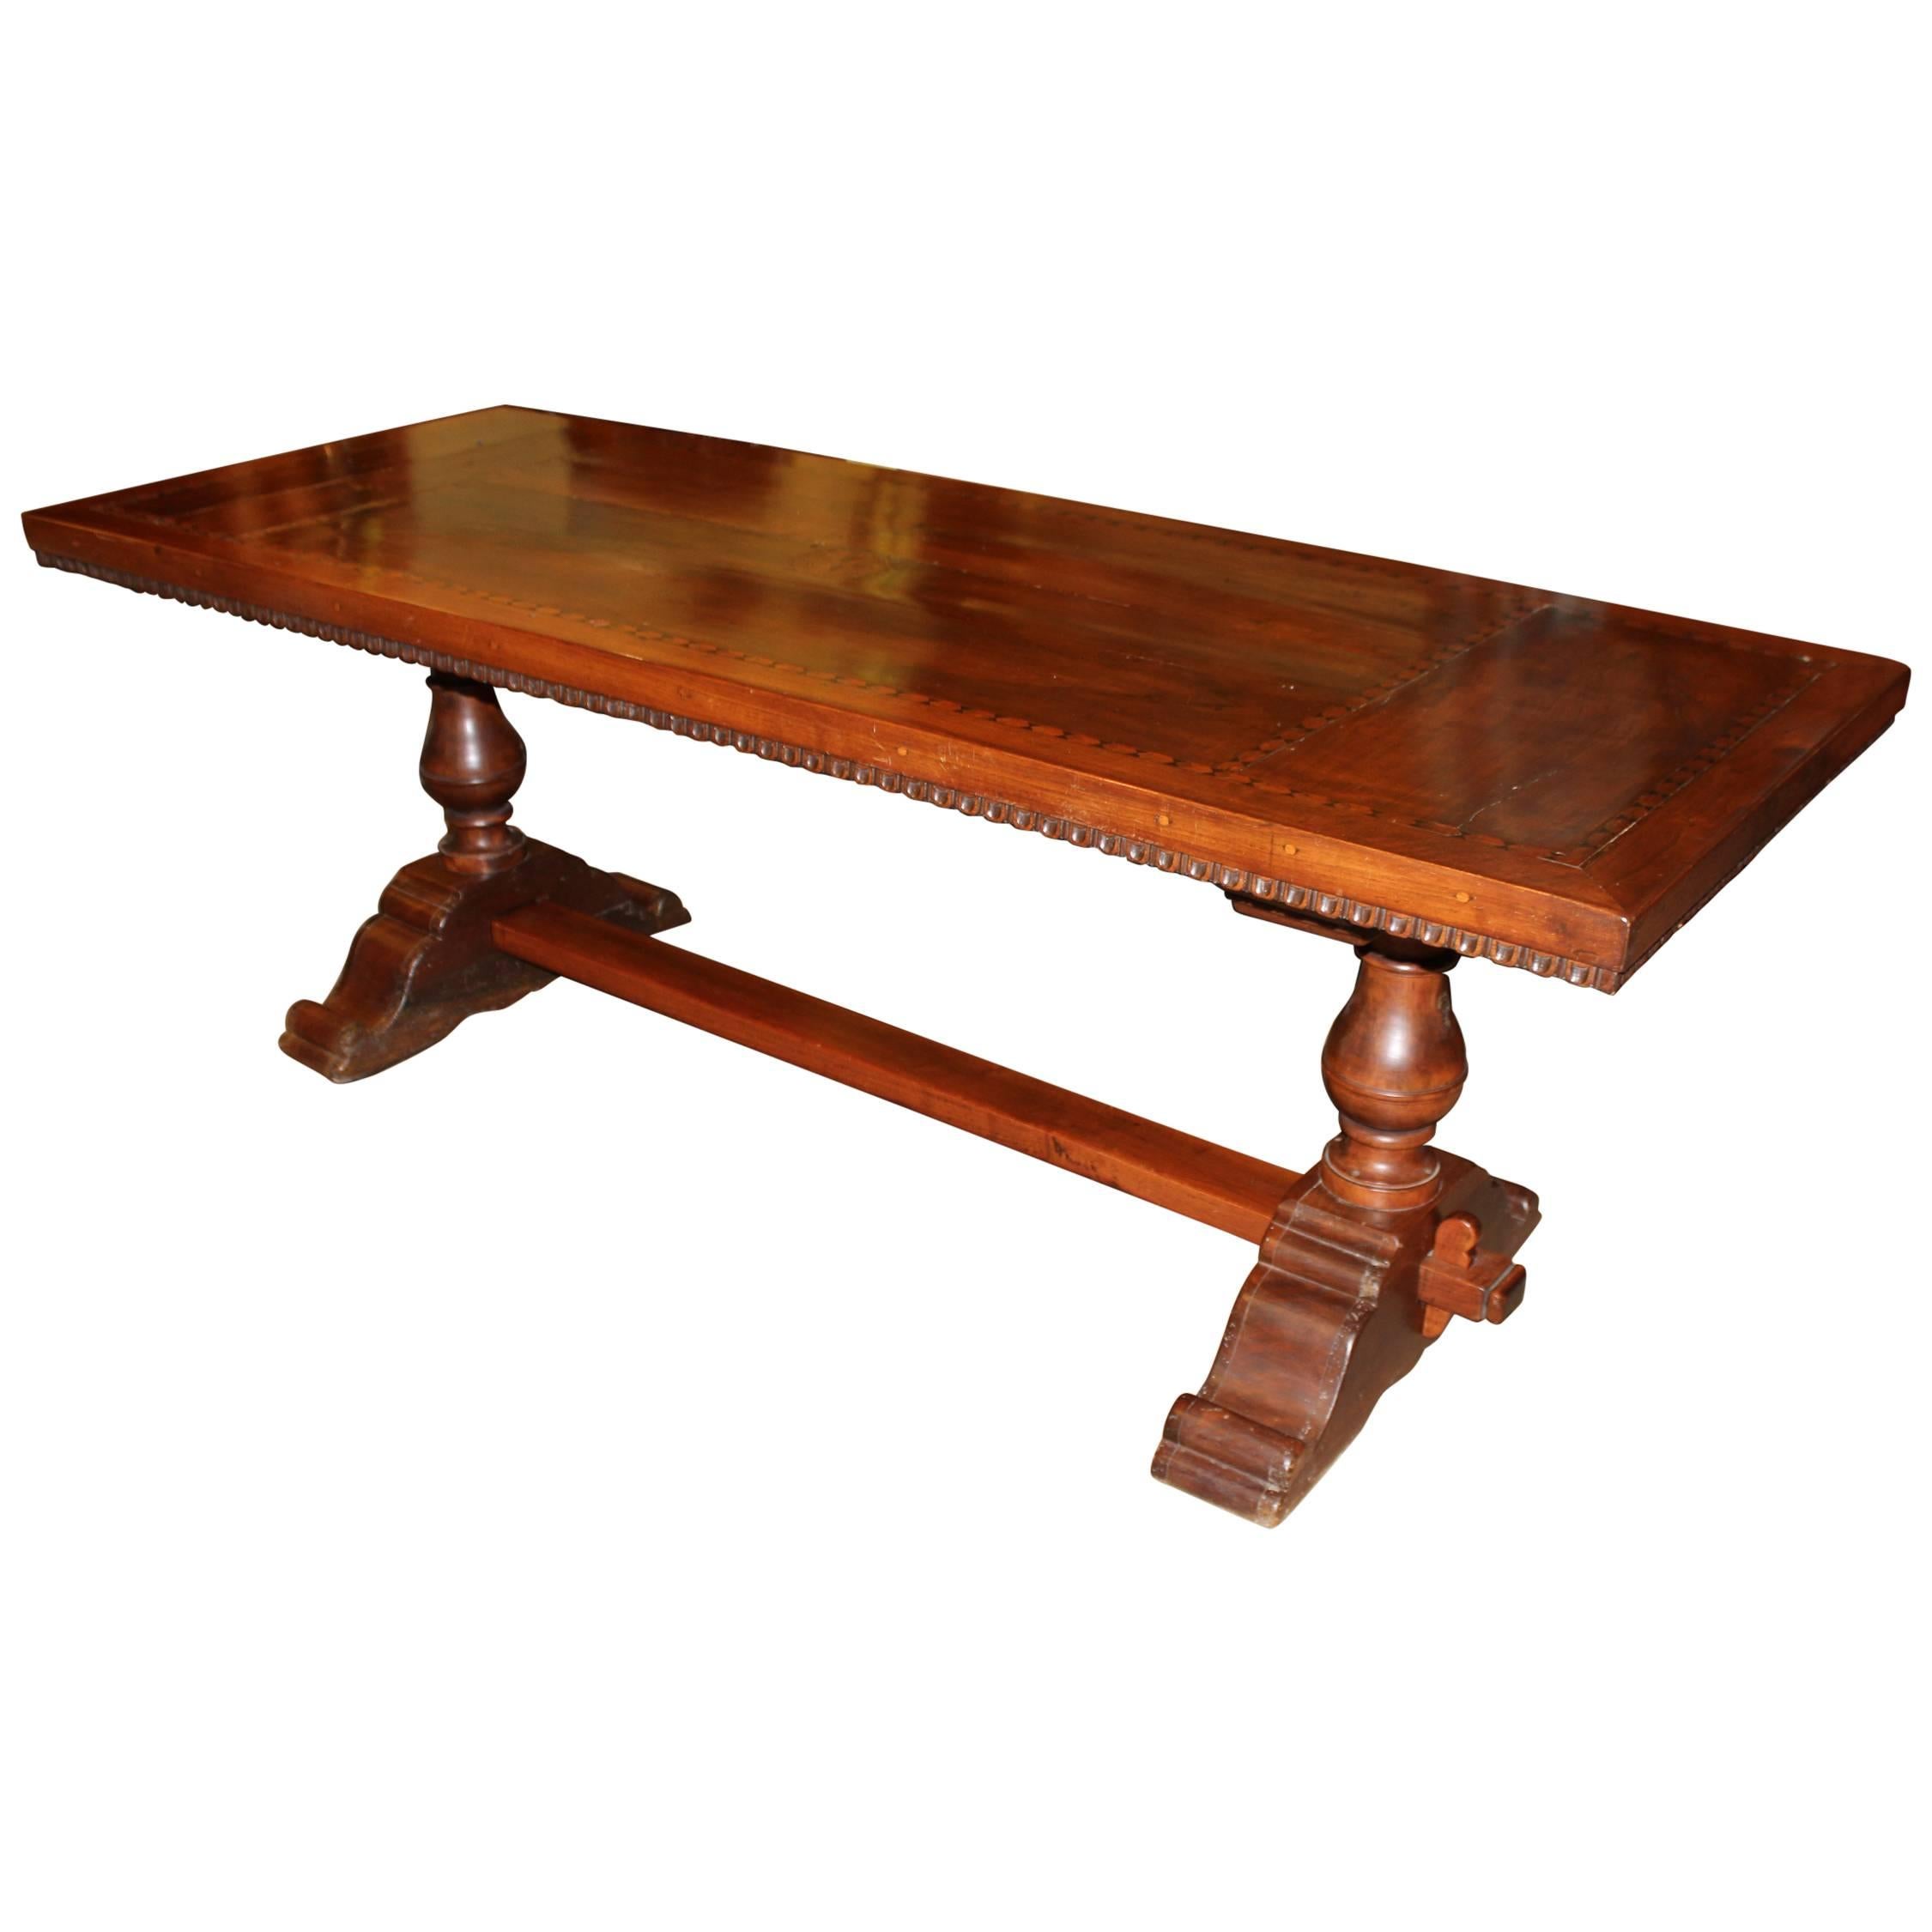 19th Century Continental Walnut Refectory or Trestle Table with Geometric Inlay